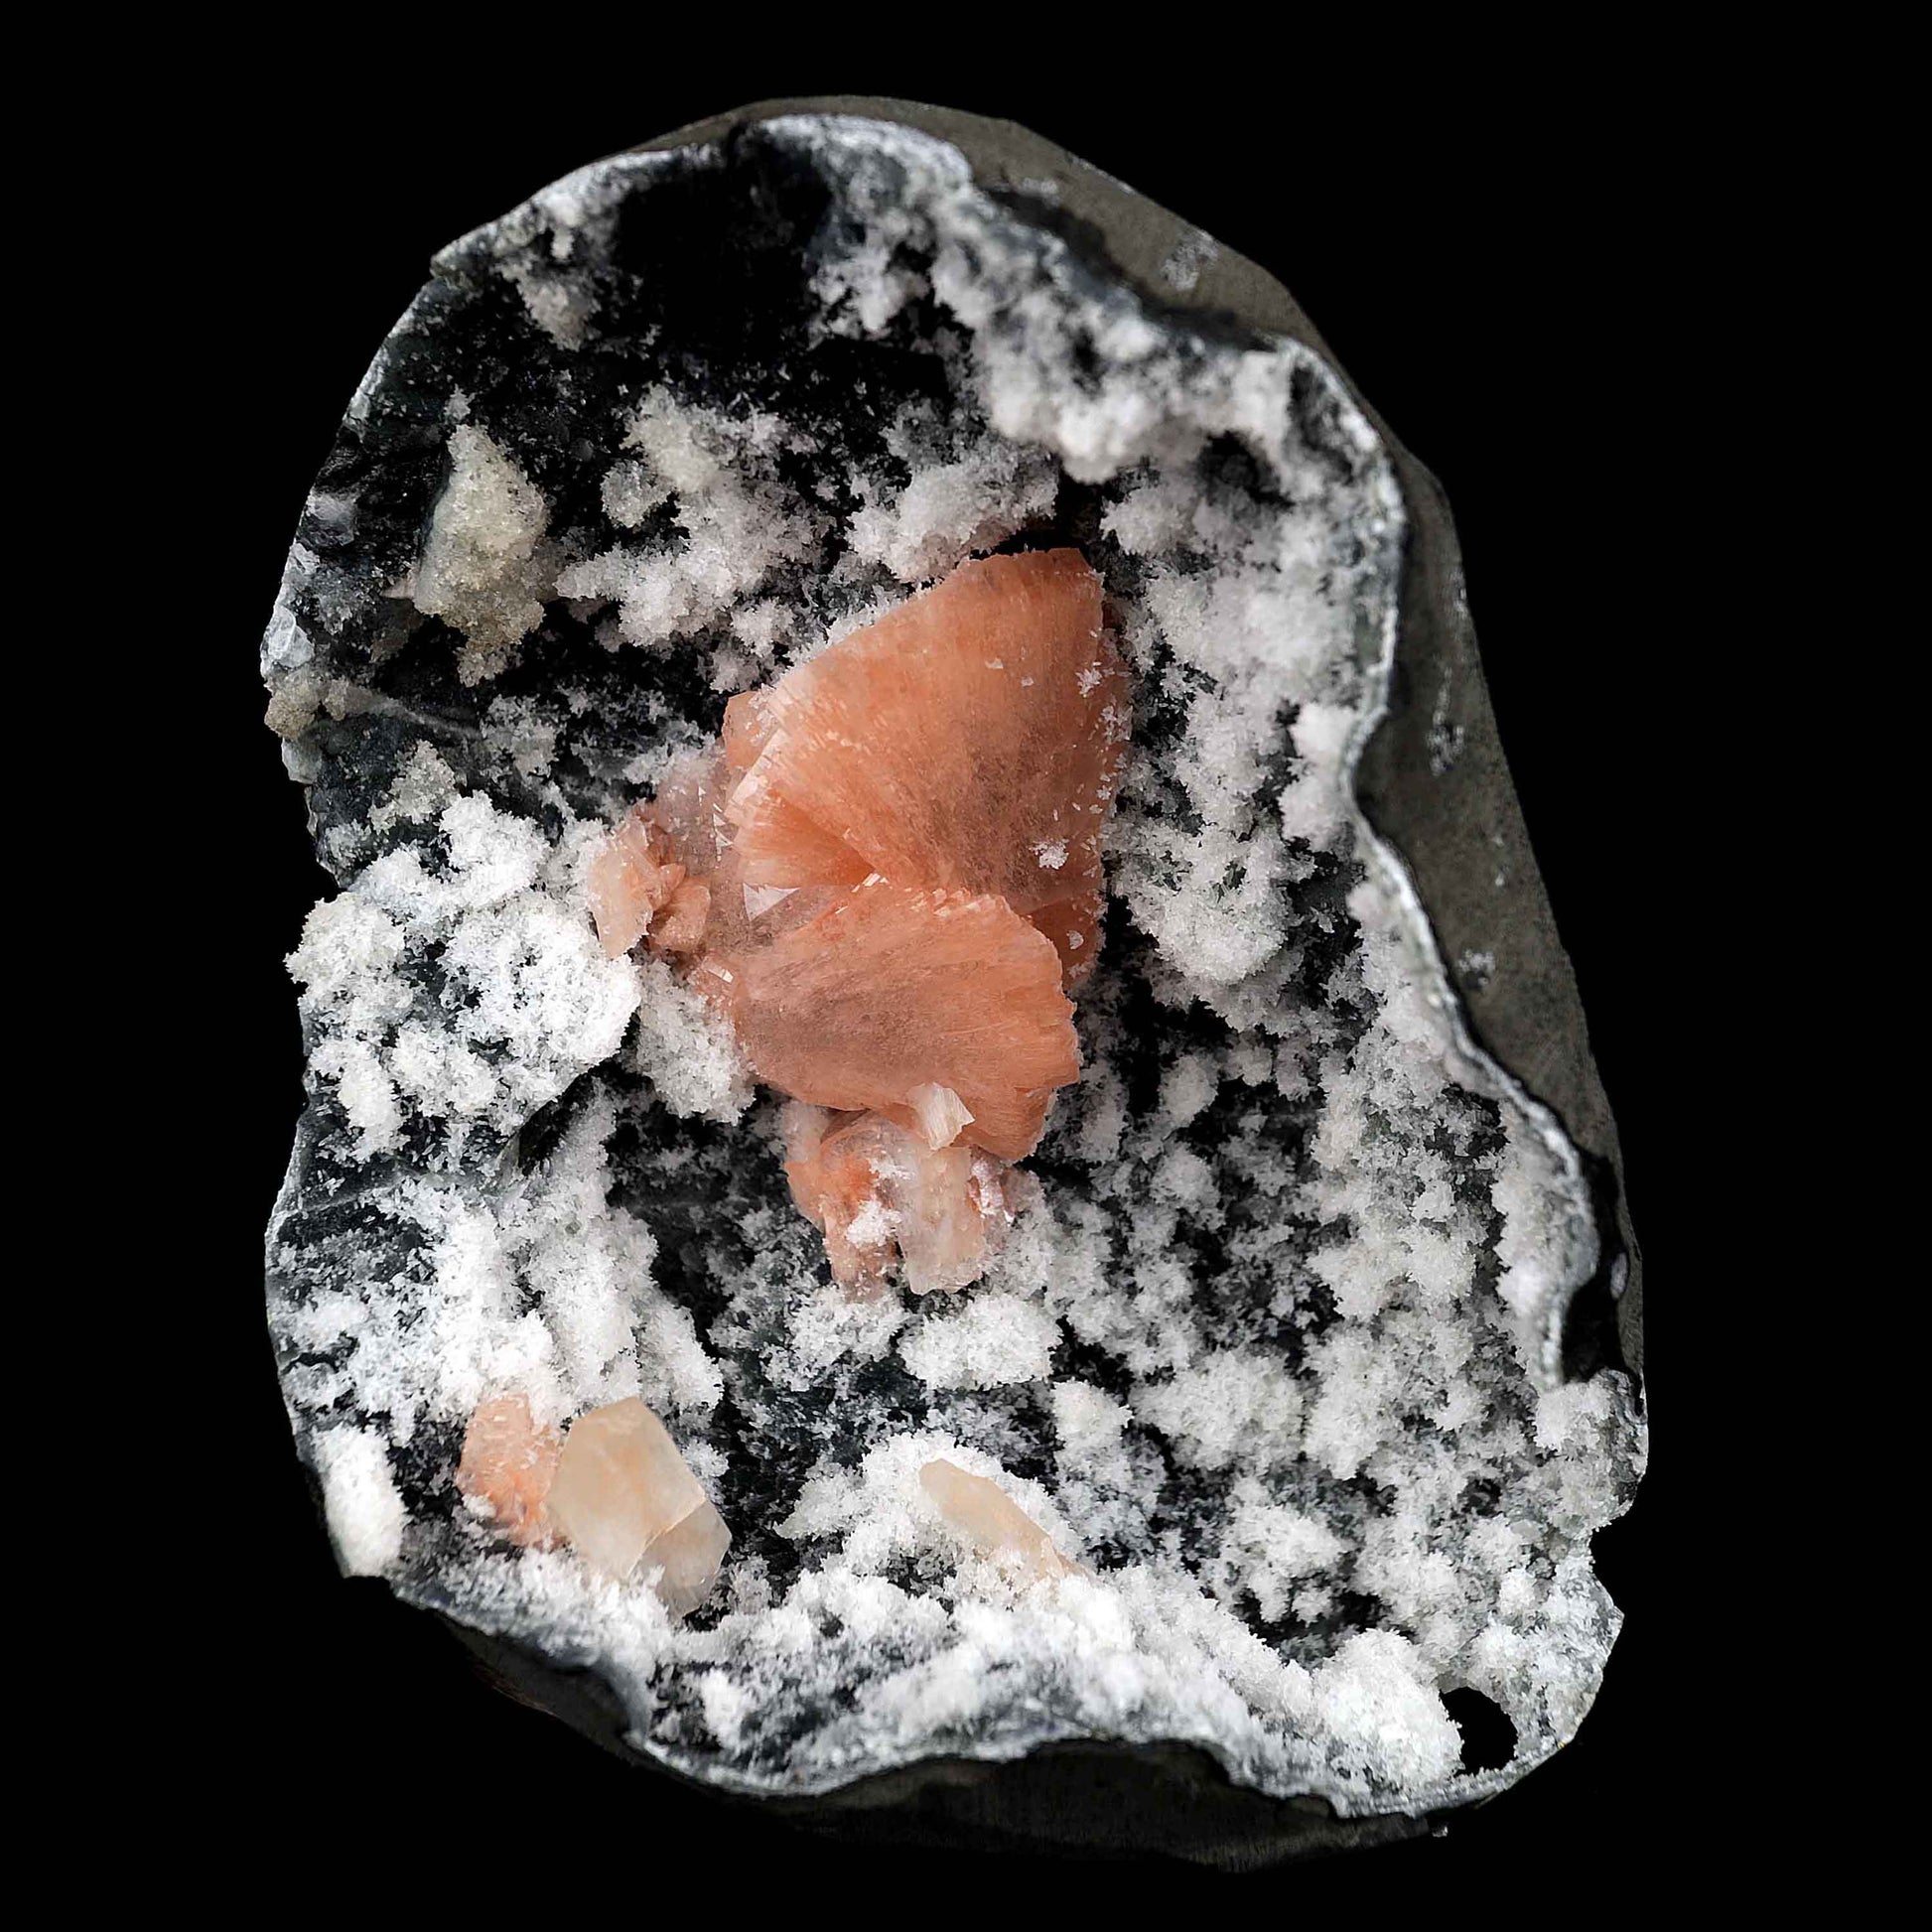 Heulandite Petal with Stilbite Inside Chalcedony Geode Natural Mineral…  https://www.superbminerals.us/products/heulandite-petal-with-stilbite-inside-chalcedony-geode-natural-mineral-b-4227  Features:A striking,1.4 cm, doubly terminated heulandite crystal is dramatically set in the sculptural, well-prepared vug in basalt lined with strikingly contrasting sparkly gray drusy chalcedony. The stunning glassy, pearlescent, translucent parallel-growth bladed heulandite has beautiful rich coral-pink color 